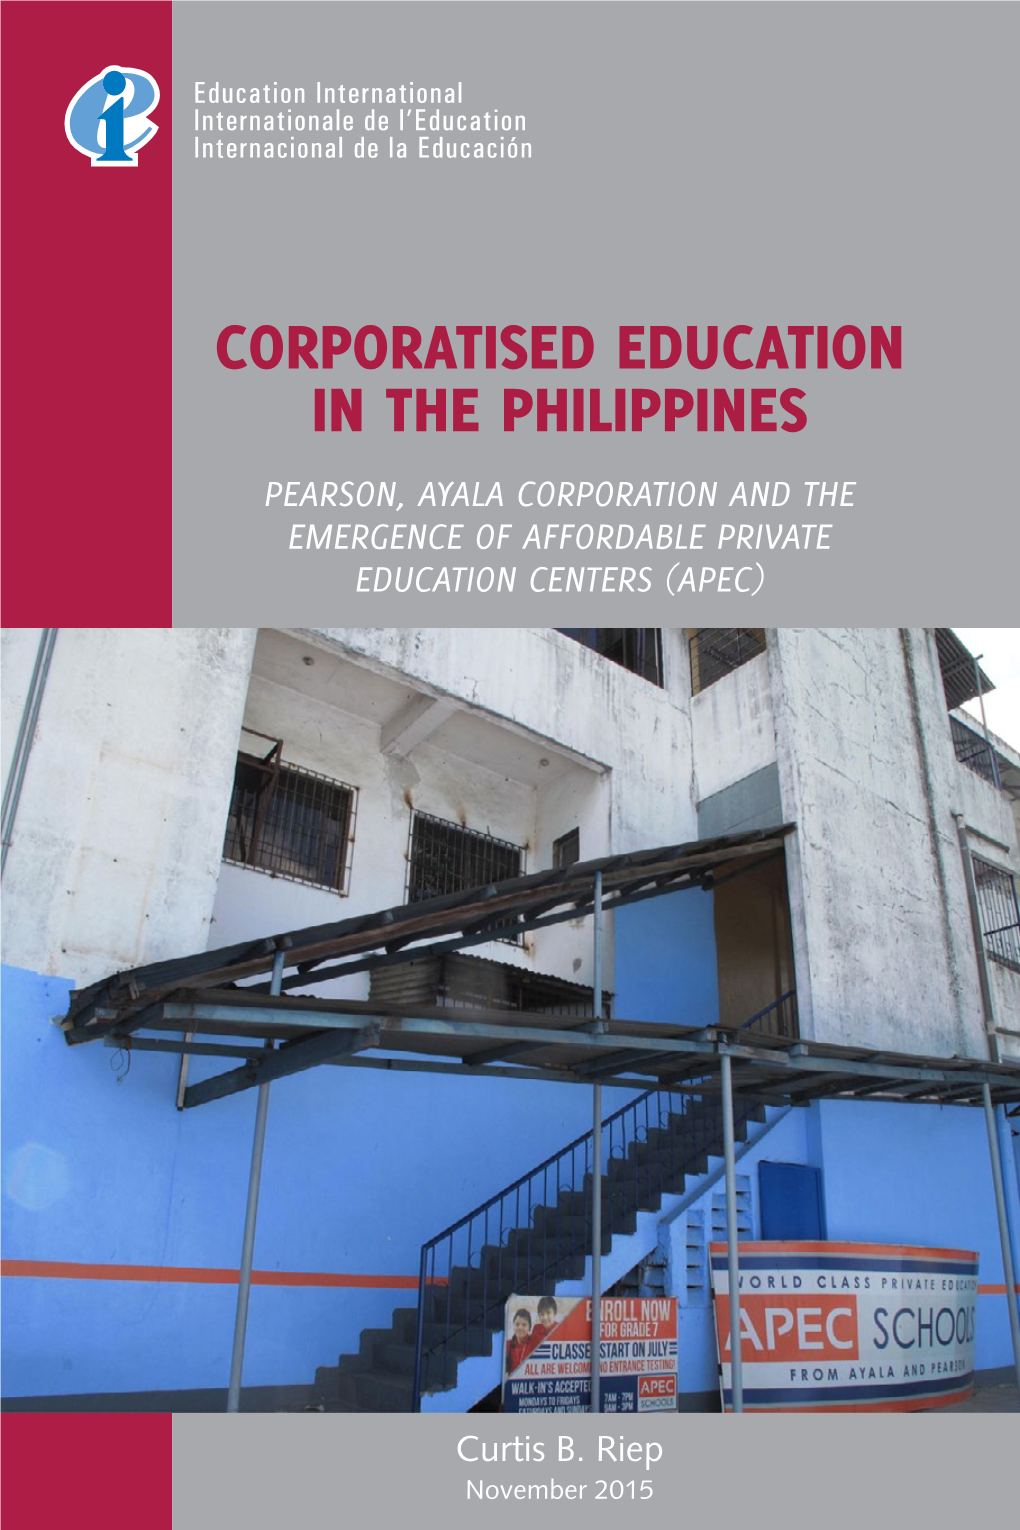 Corporatised Education in the Philippines Pearson, Ayala Corporation and the Emergence of Affordable Private Education Centers (Apec)